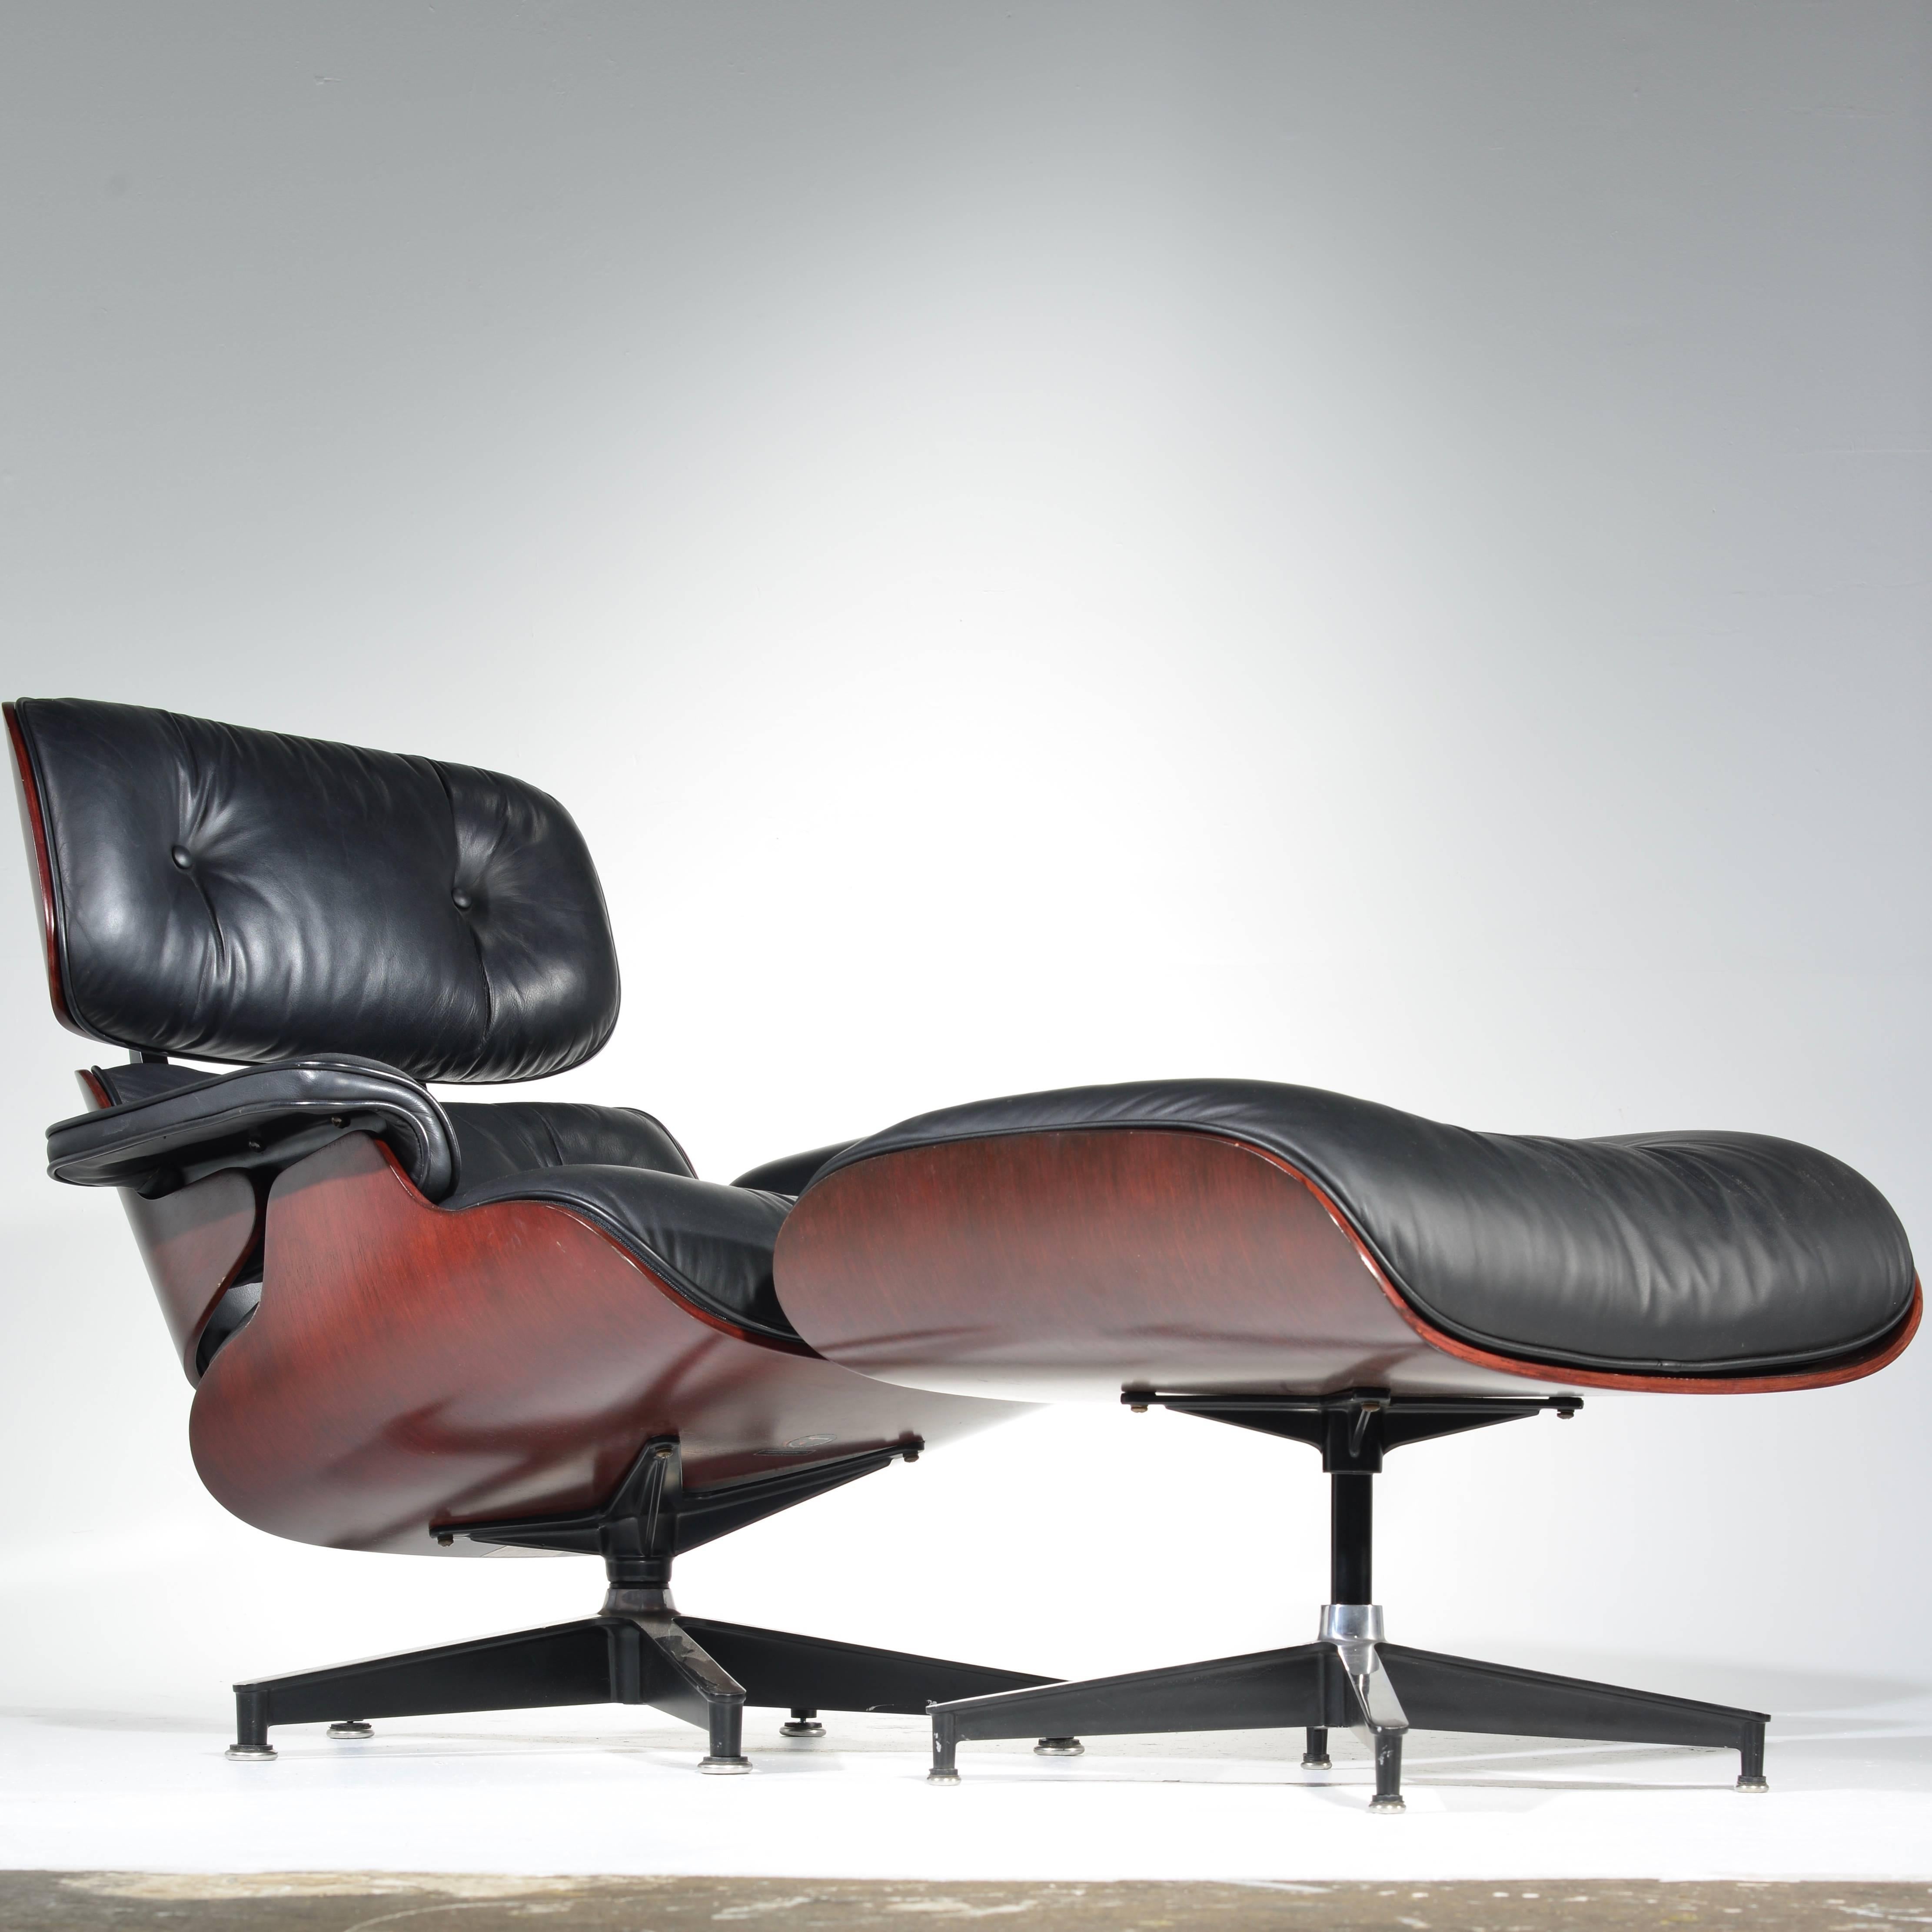 670 lounge chair and 671 ottoman designed by Charles and Ray Eames for Herman Miller. This iconic piece features a rosewood shell and original black leather upholstery.